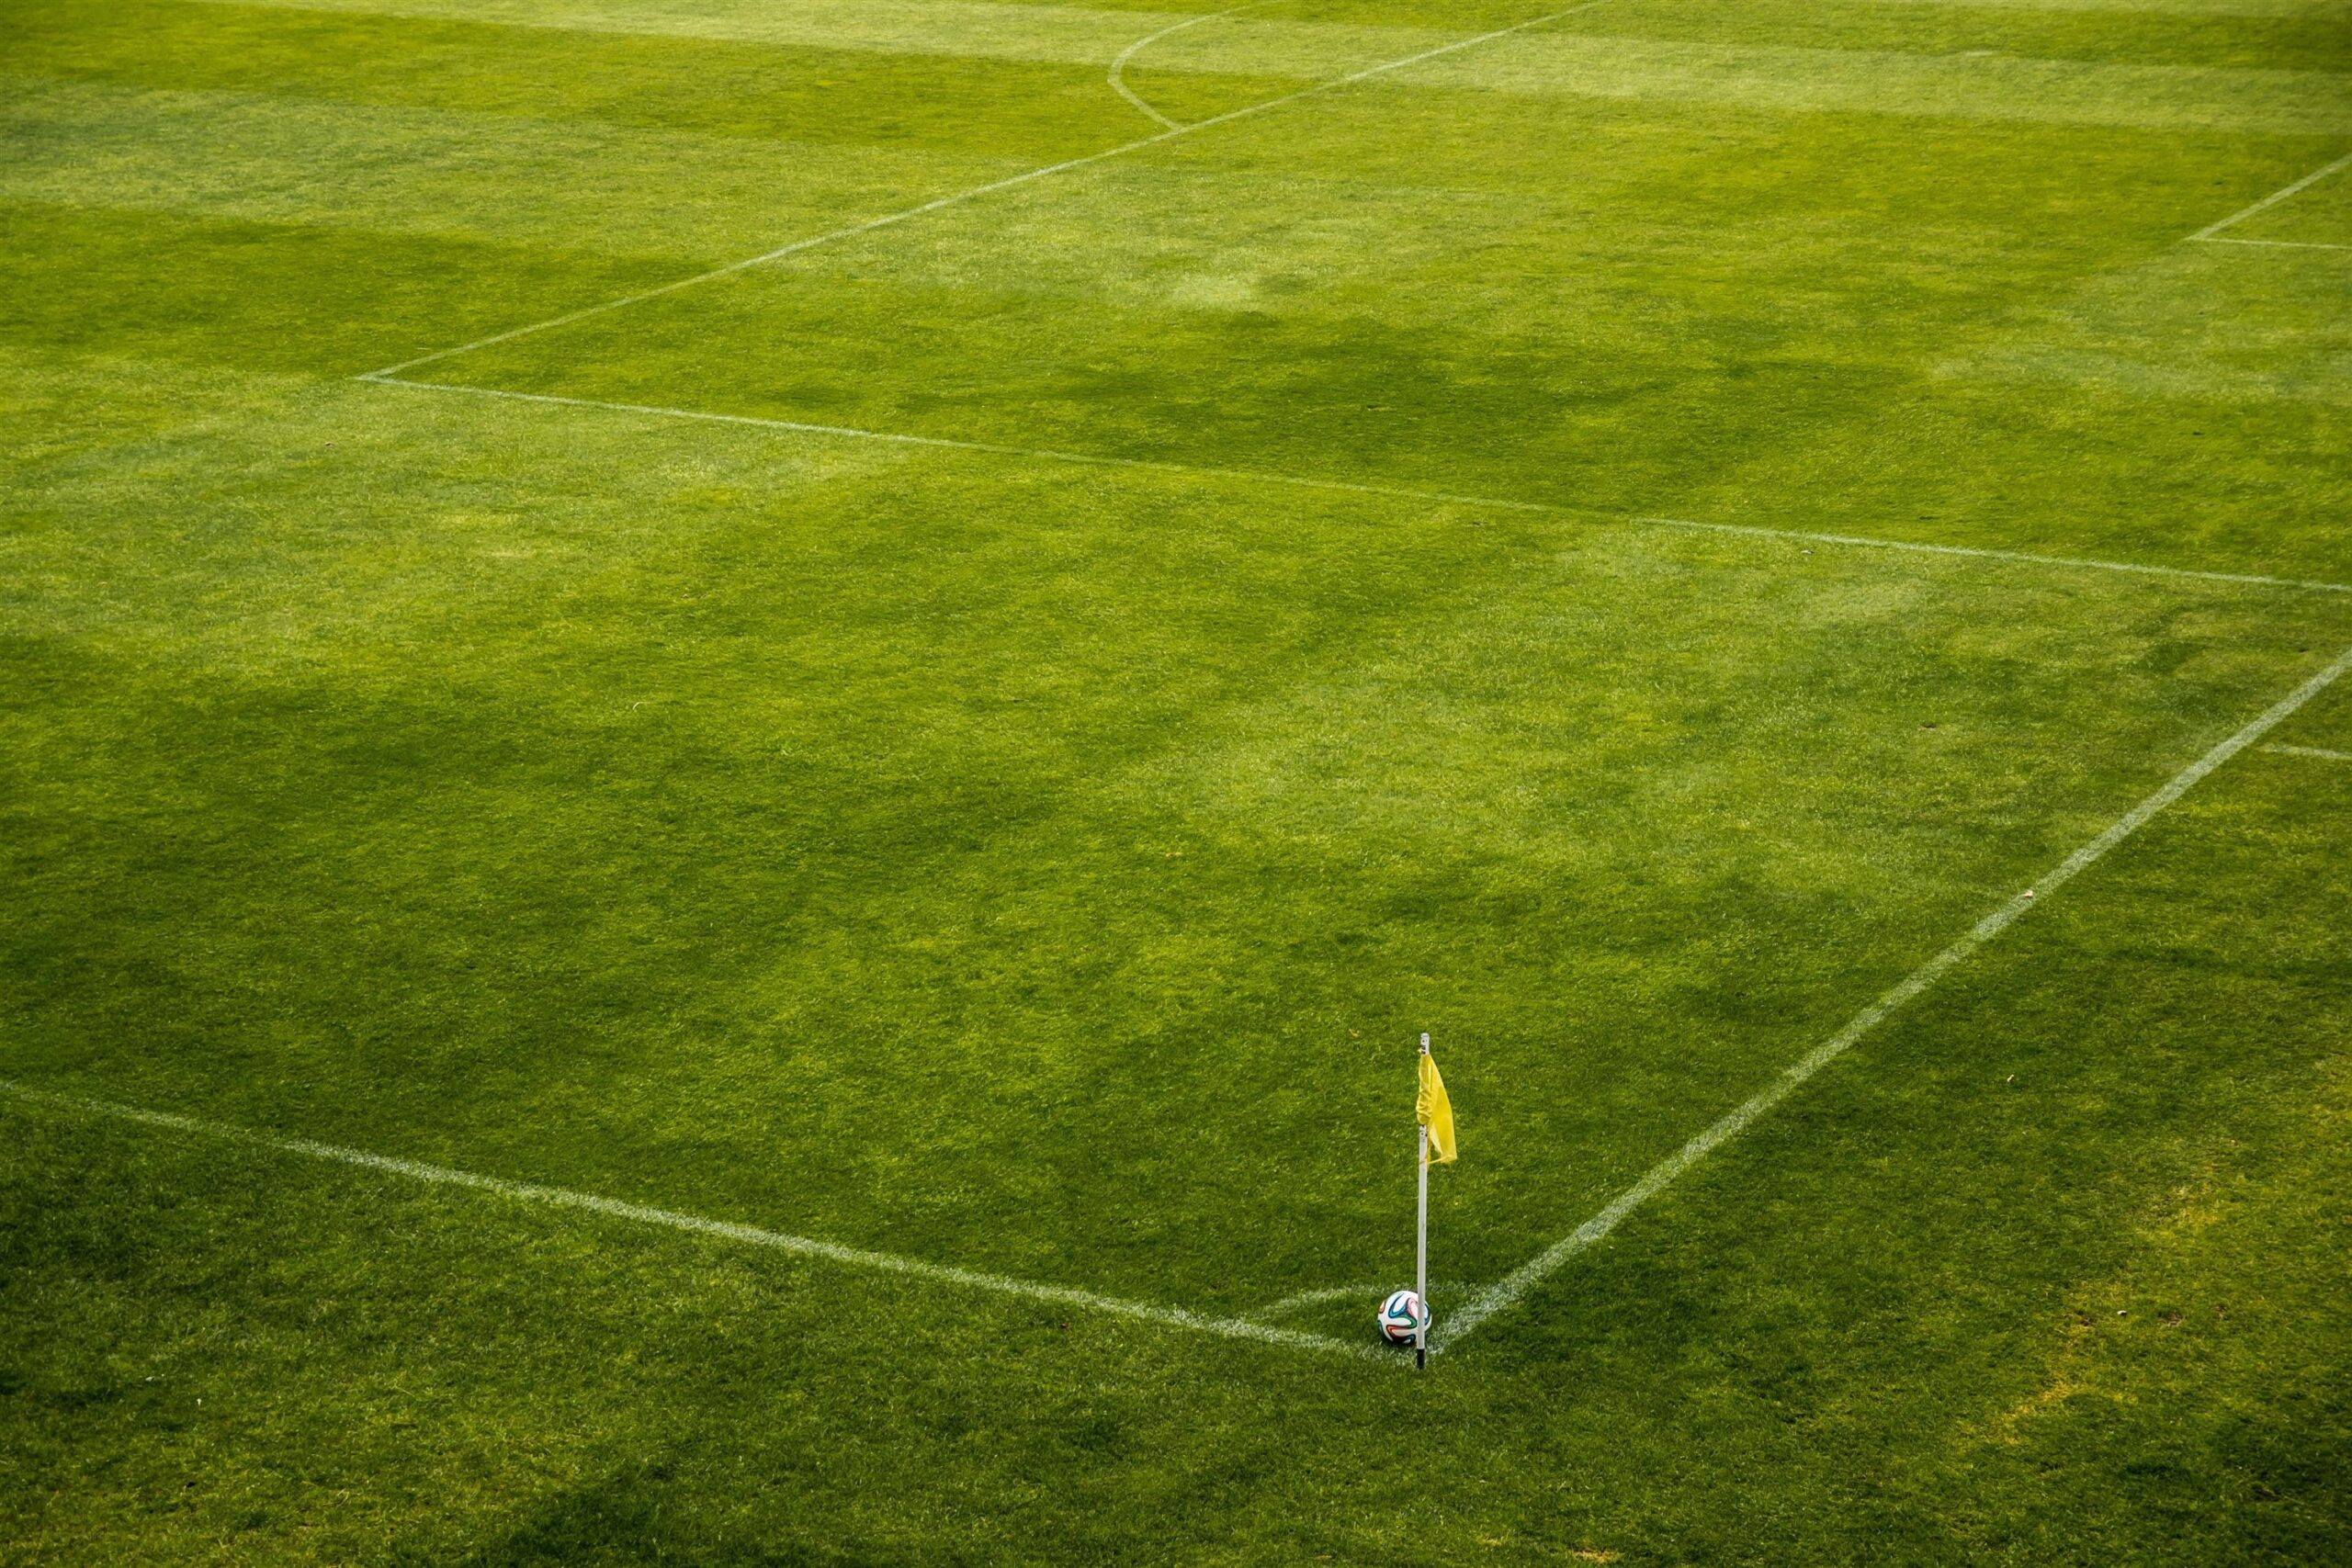 Sports Pitches; The AGS Renovation Agronomic Principles